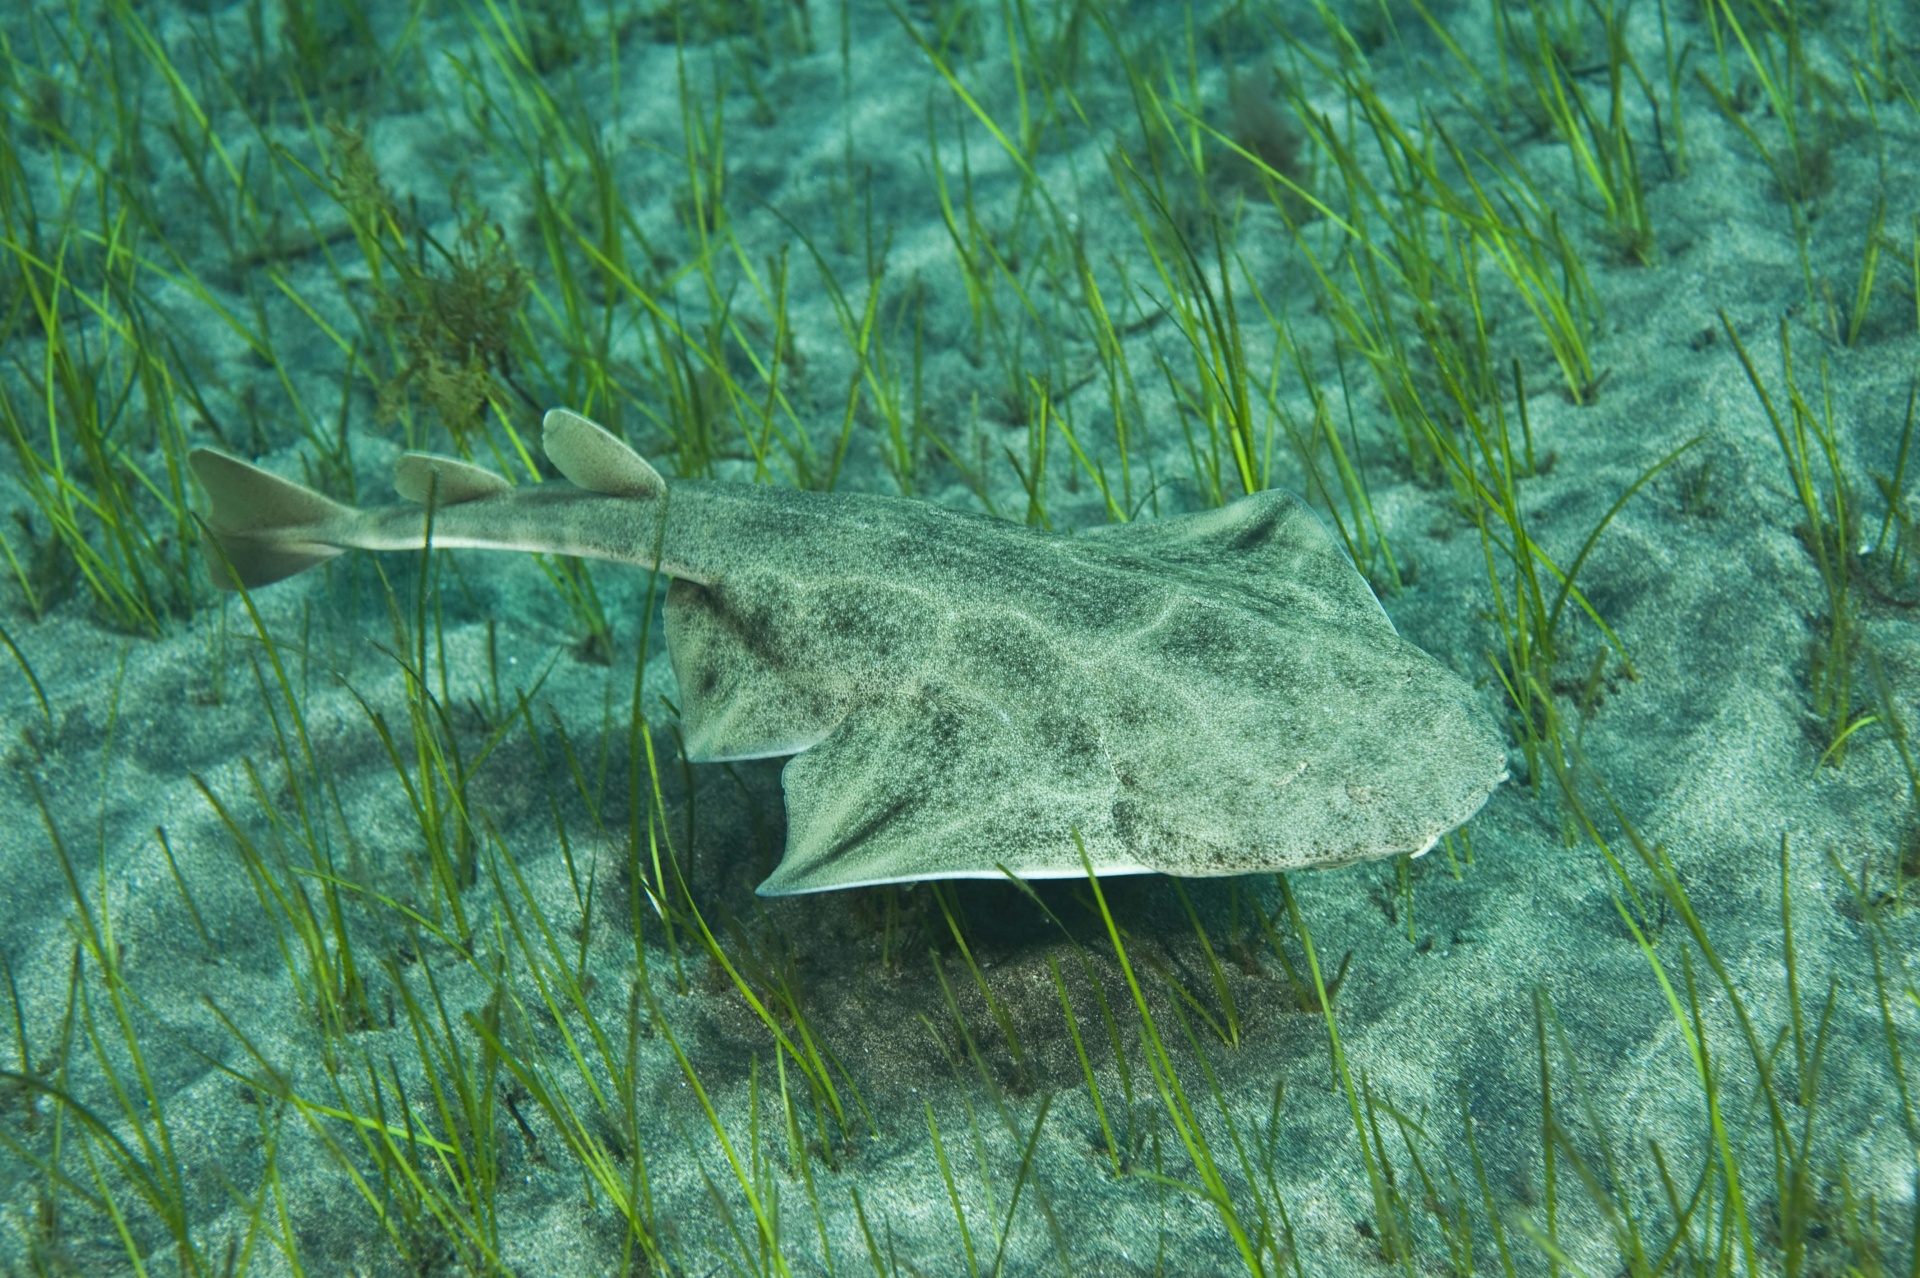 About the Acoustic monitoring of the behaviour of the angelshark in critical conservation areas 